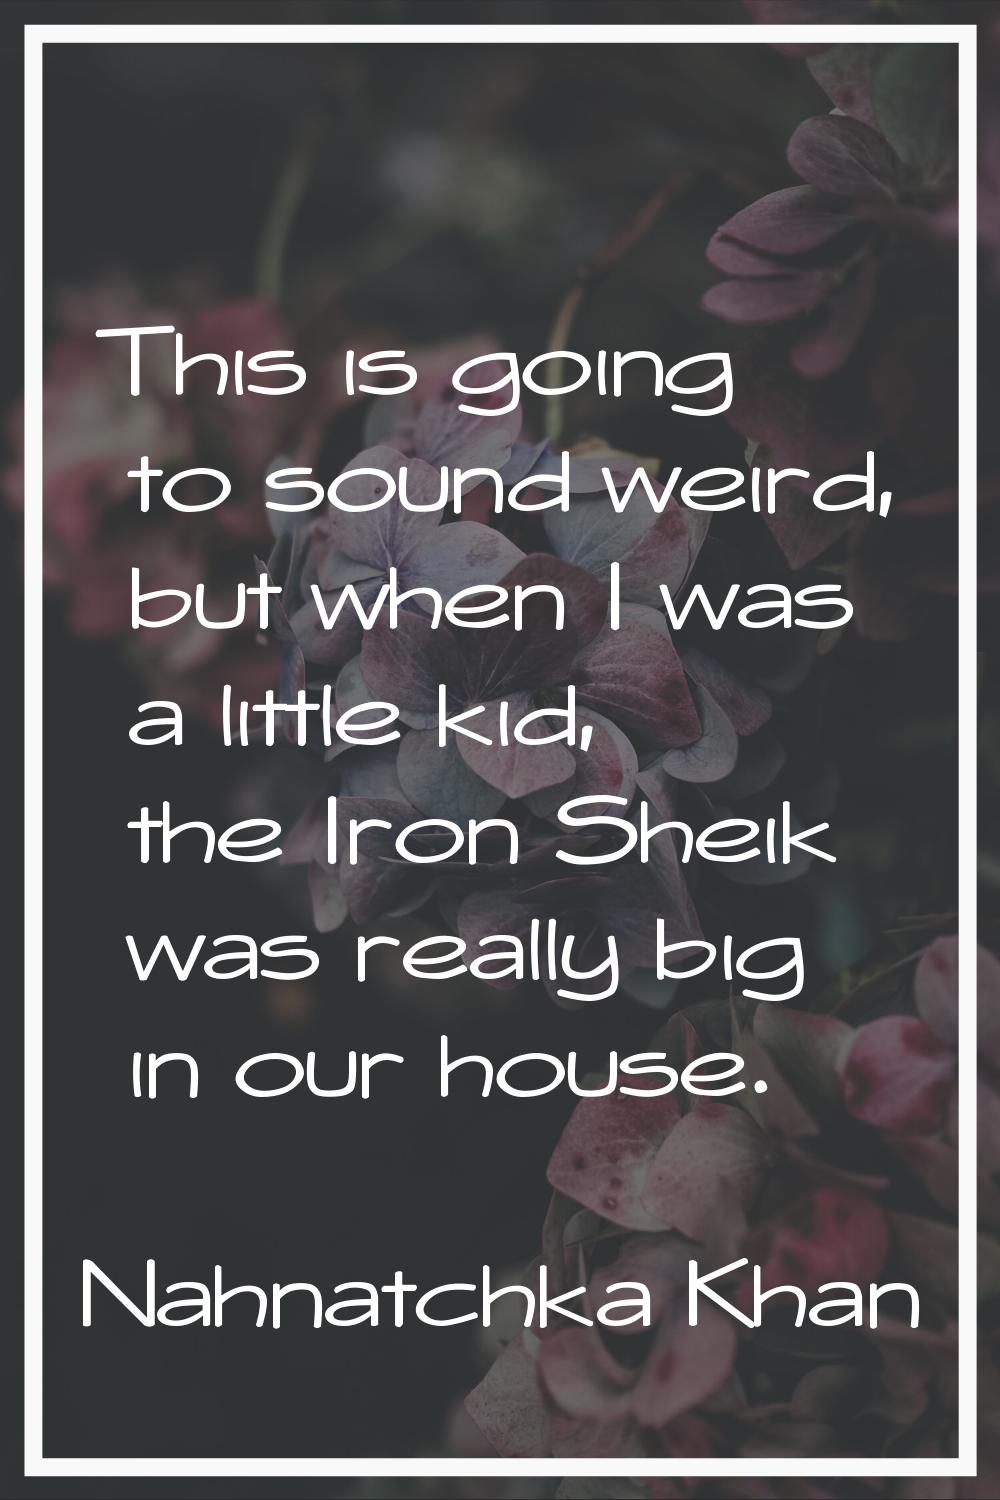 This is going to sound weird, but when I was a little kid, the Iron Sheik was really big in our hou